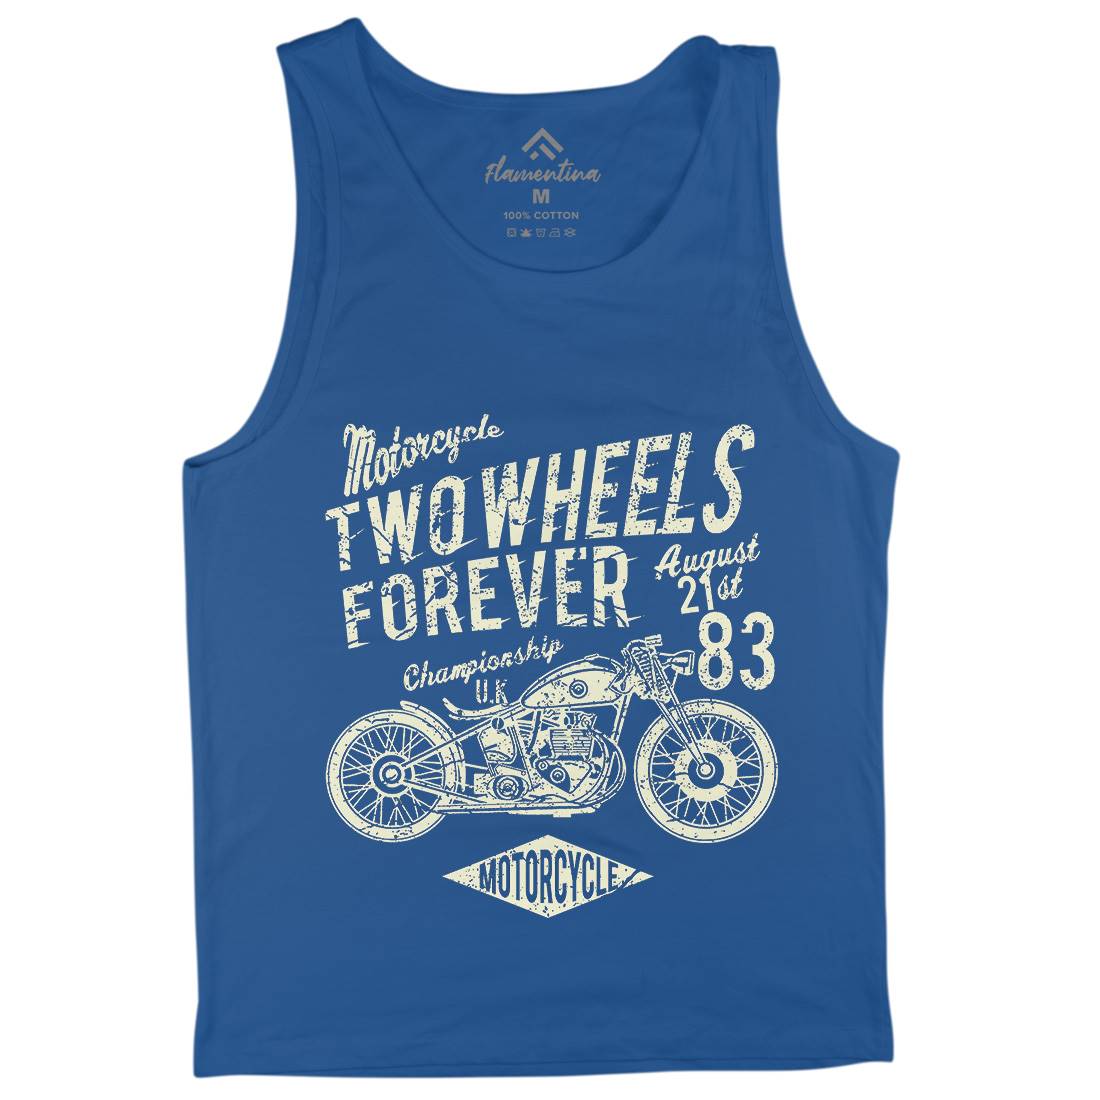 Two Wheels Forever Mens Tank Top Vest Motorcycles A186